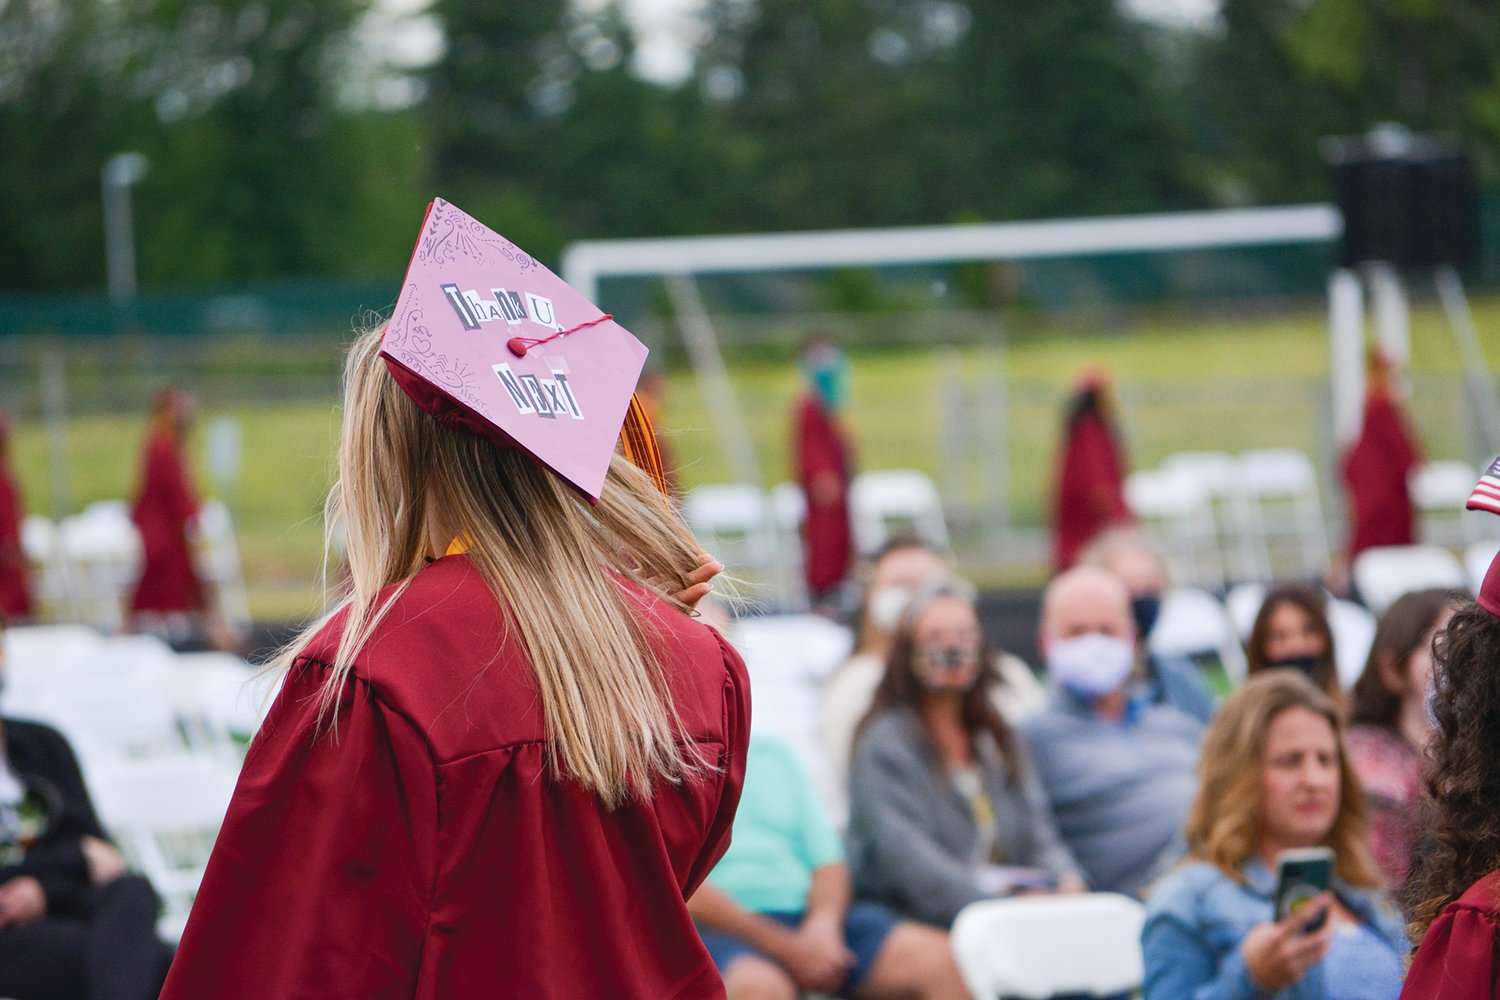 Prairie High School seniors decorated their graduation caps with flowers and messages, like “Thank you, next.”